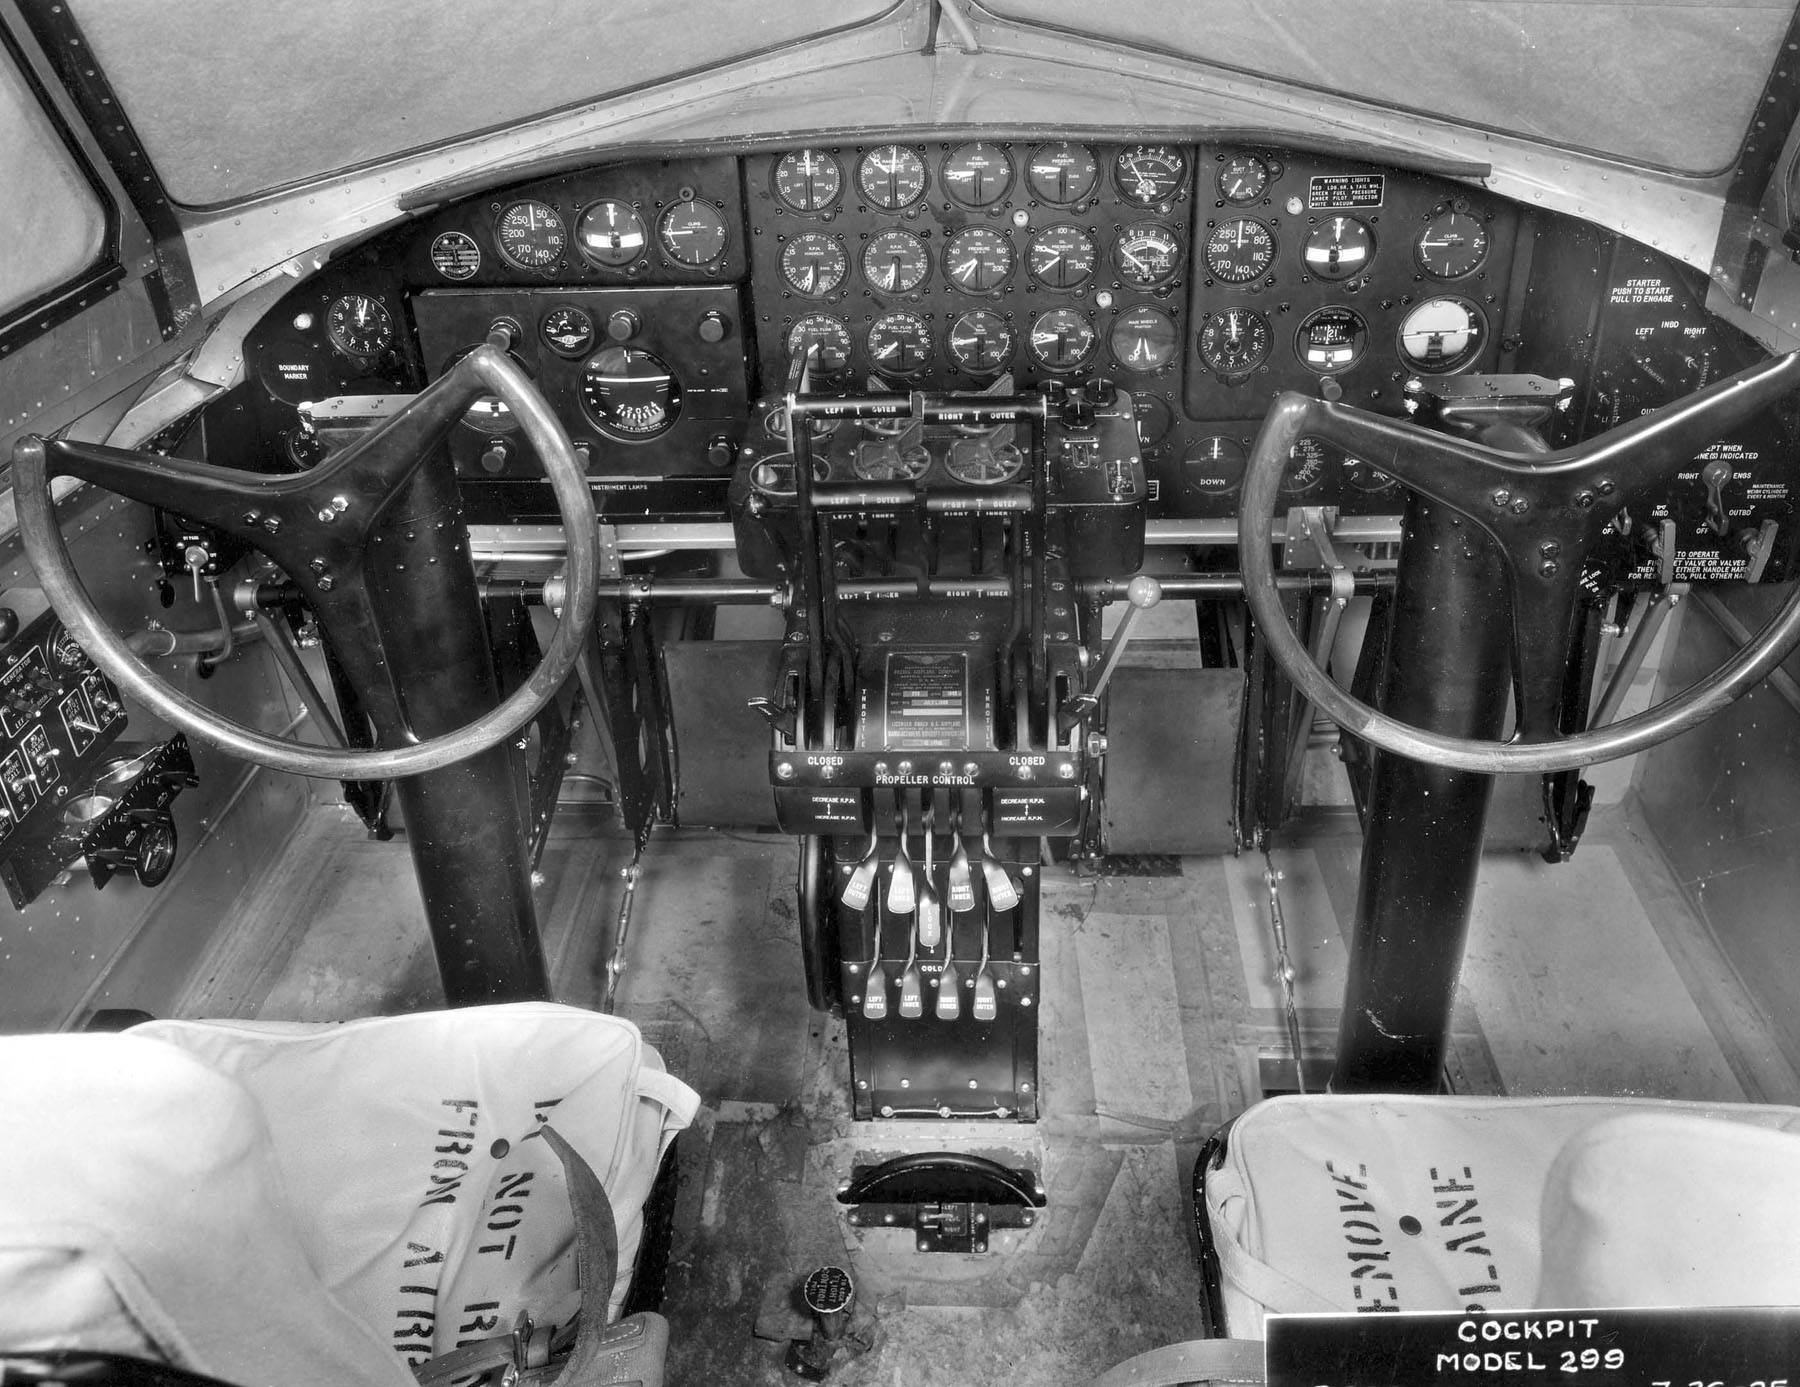 Cockpit of the Boeing Model 299. (U.S. Air Force)